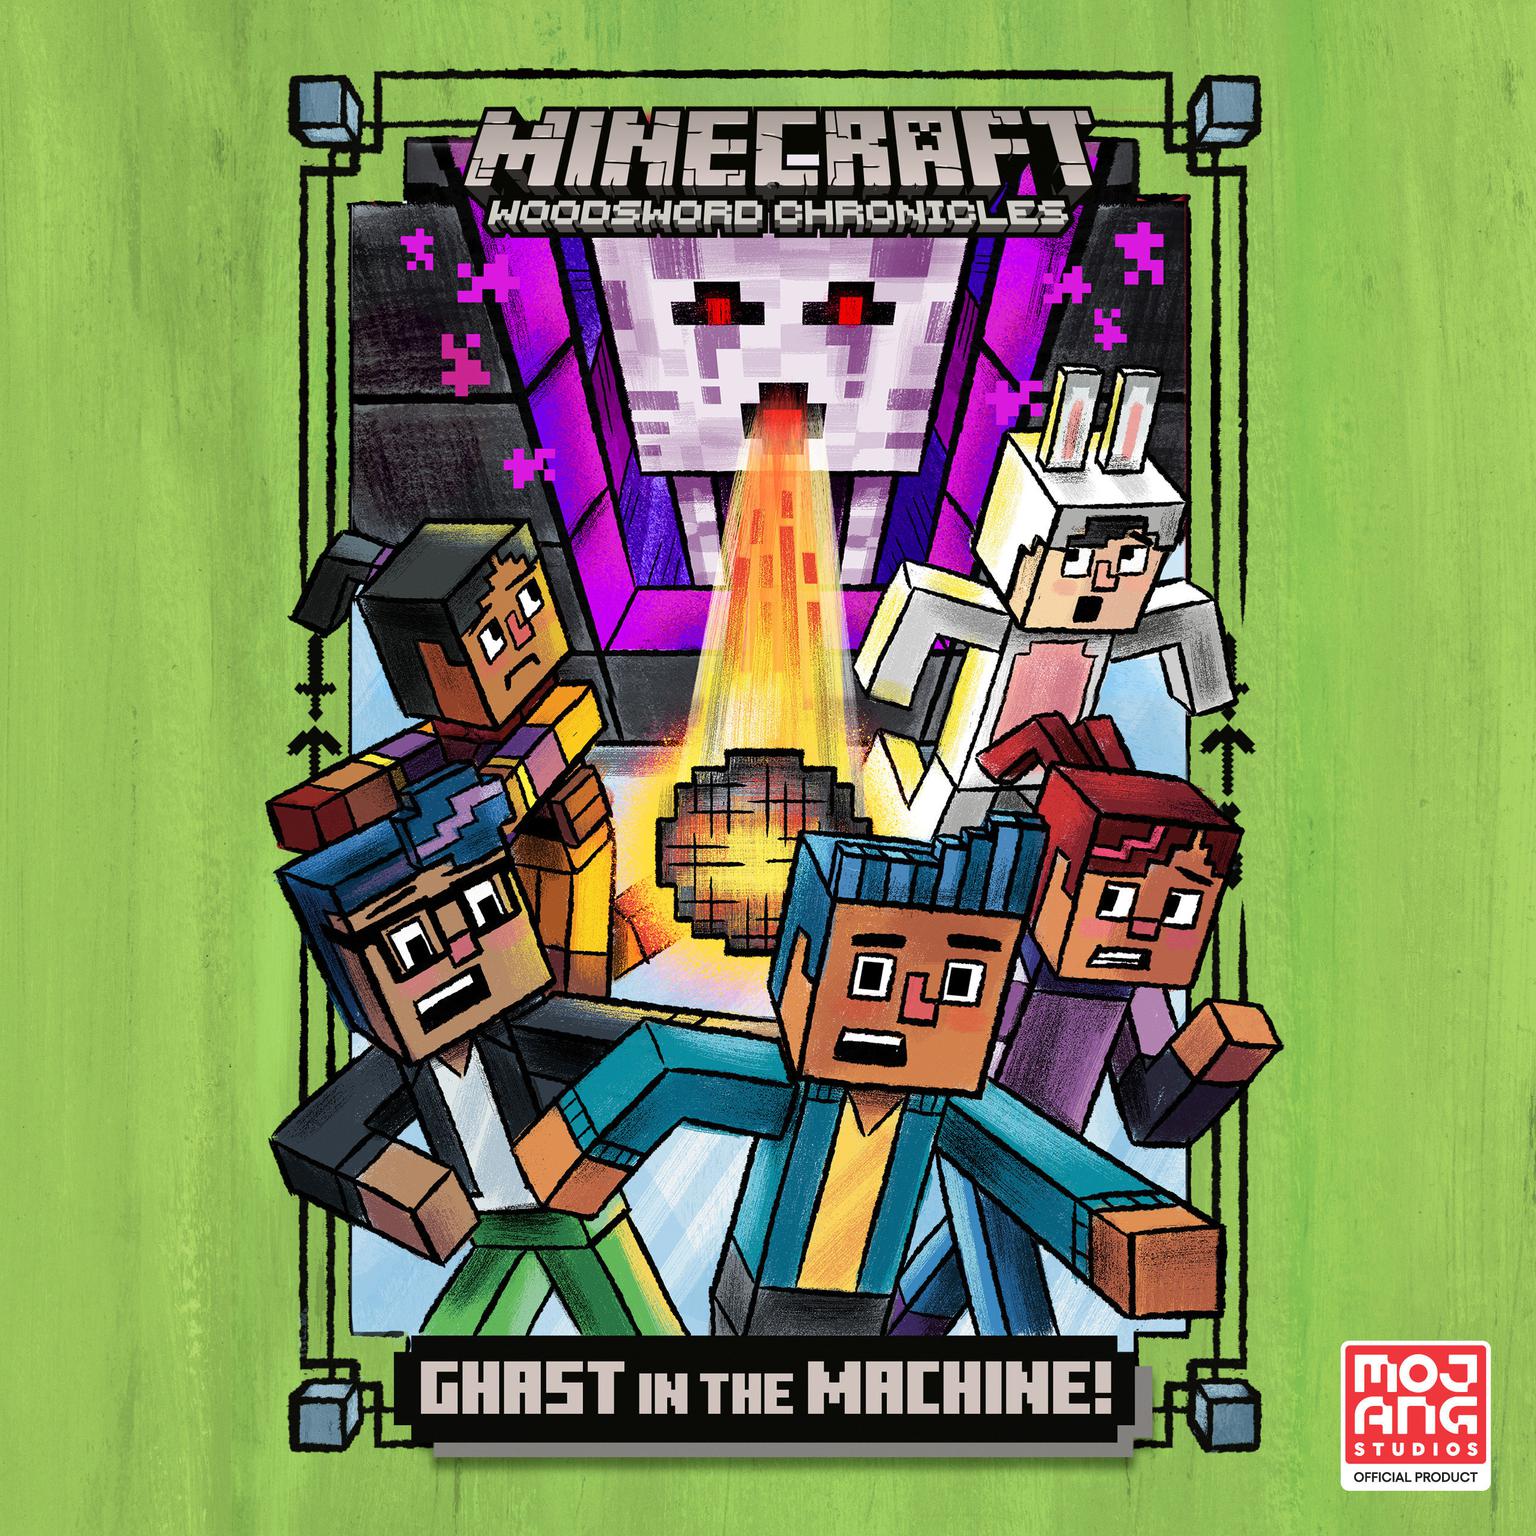 Ghast in the Machine! (Minecraft Woodsword Chronicles #4) Audiobook, by Nick Eliopulos